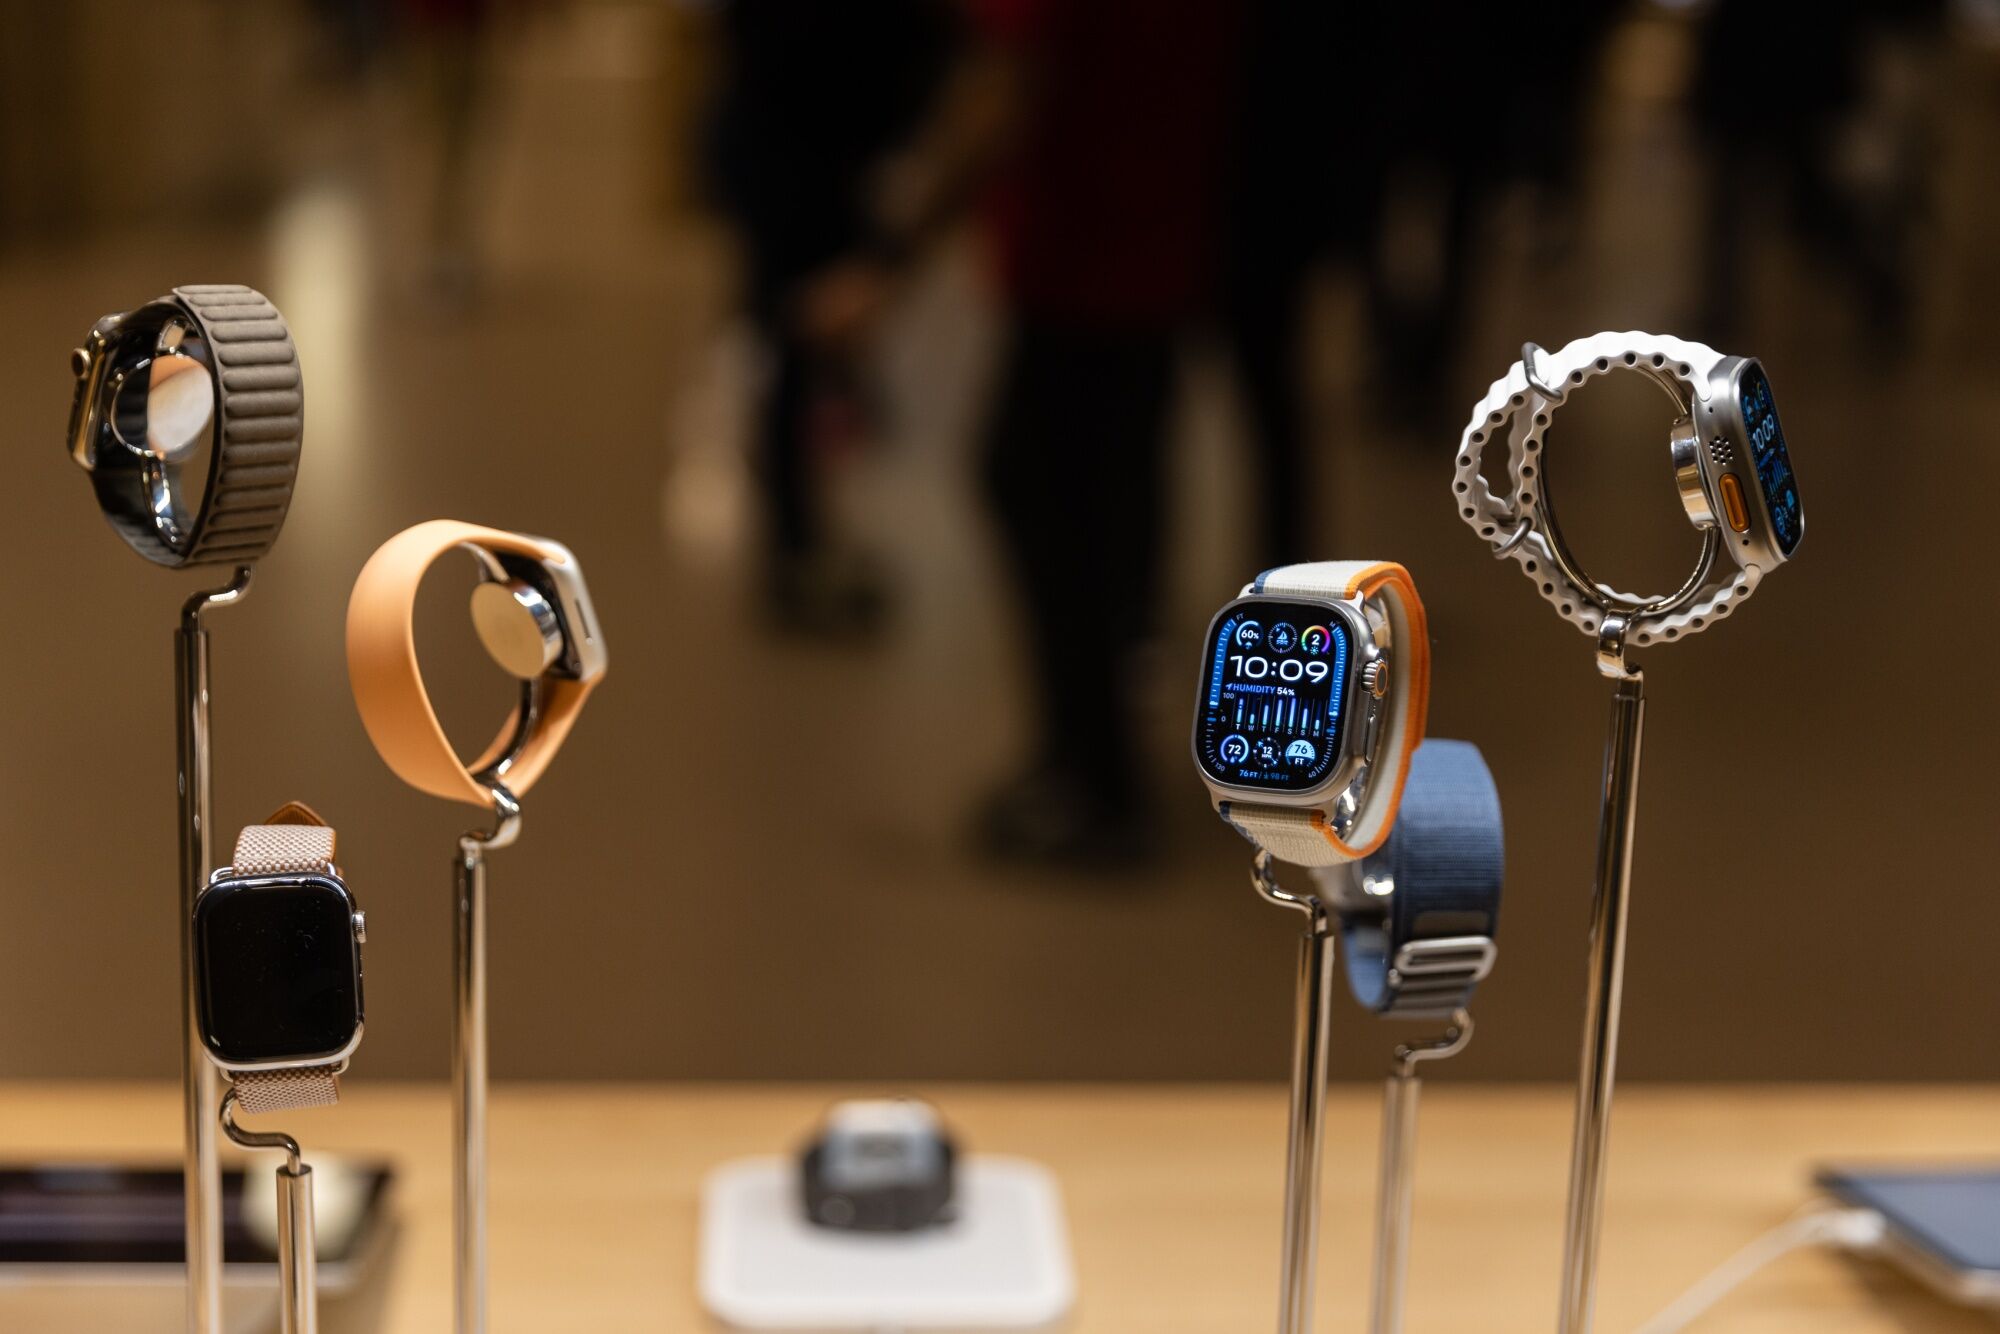 Apple Watch sales ban put on hold by appeals court - The Boston Globe